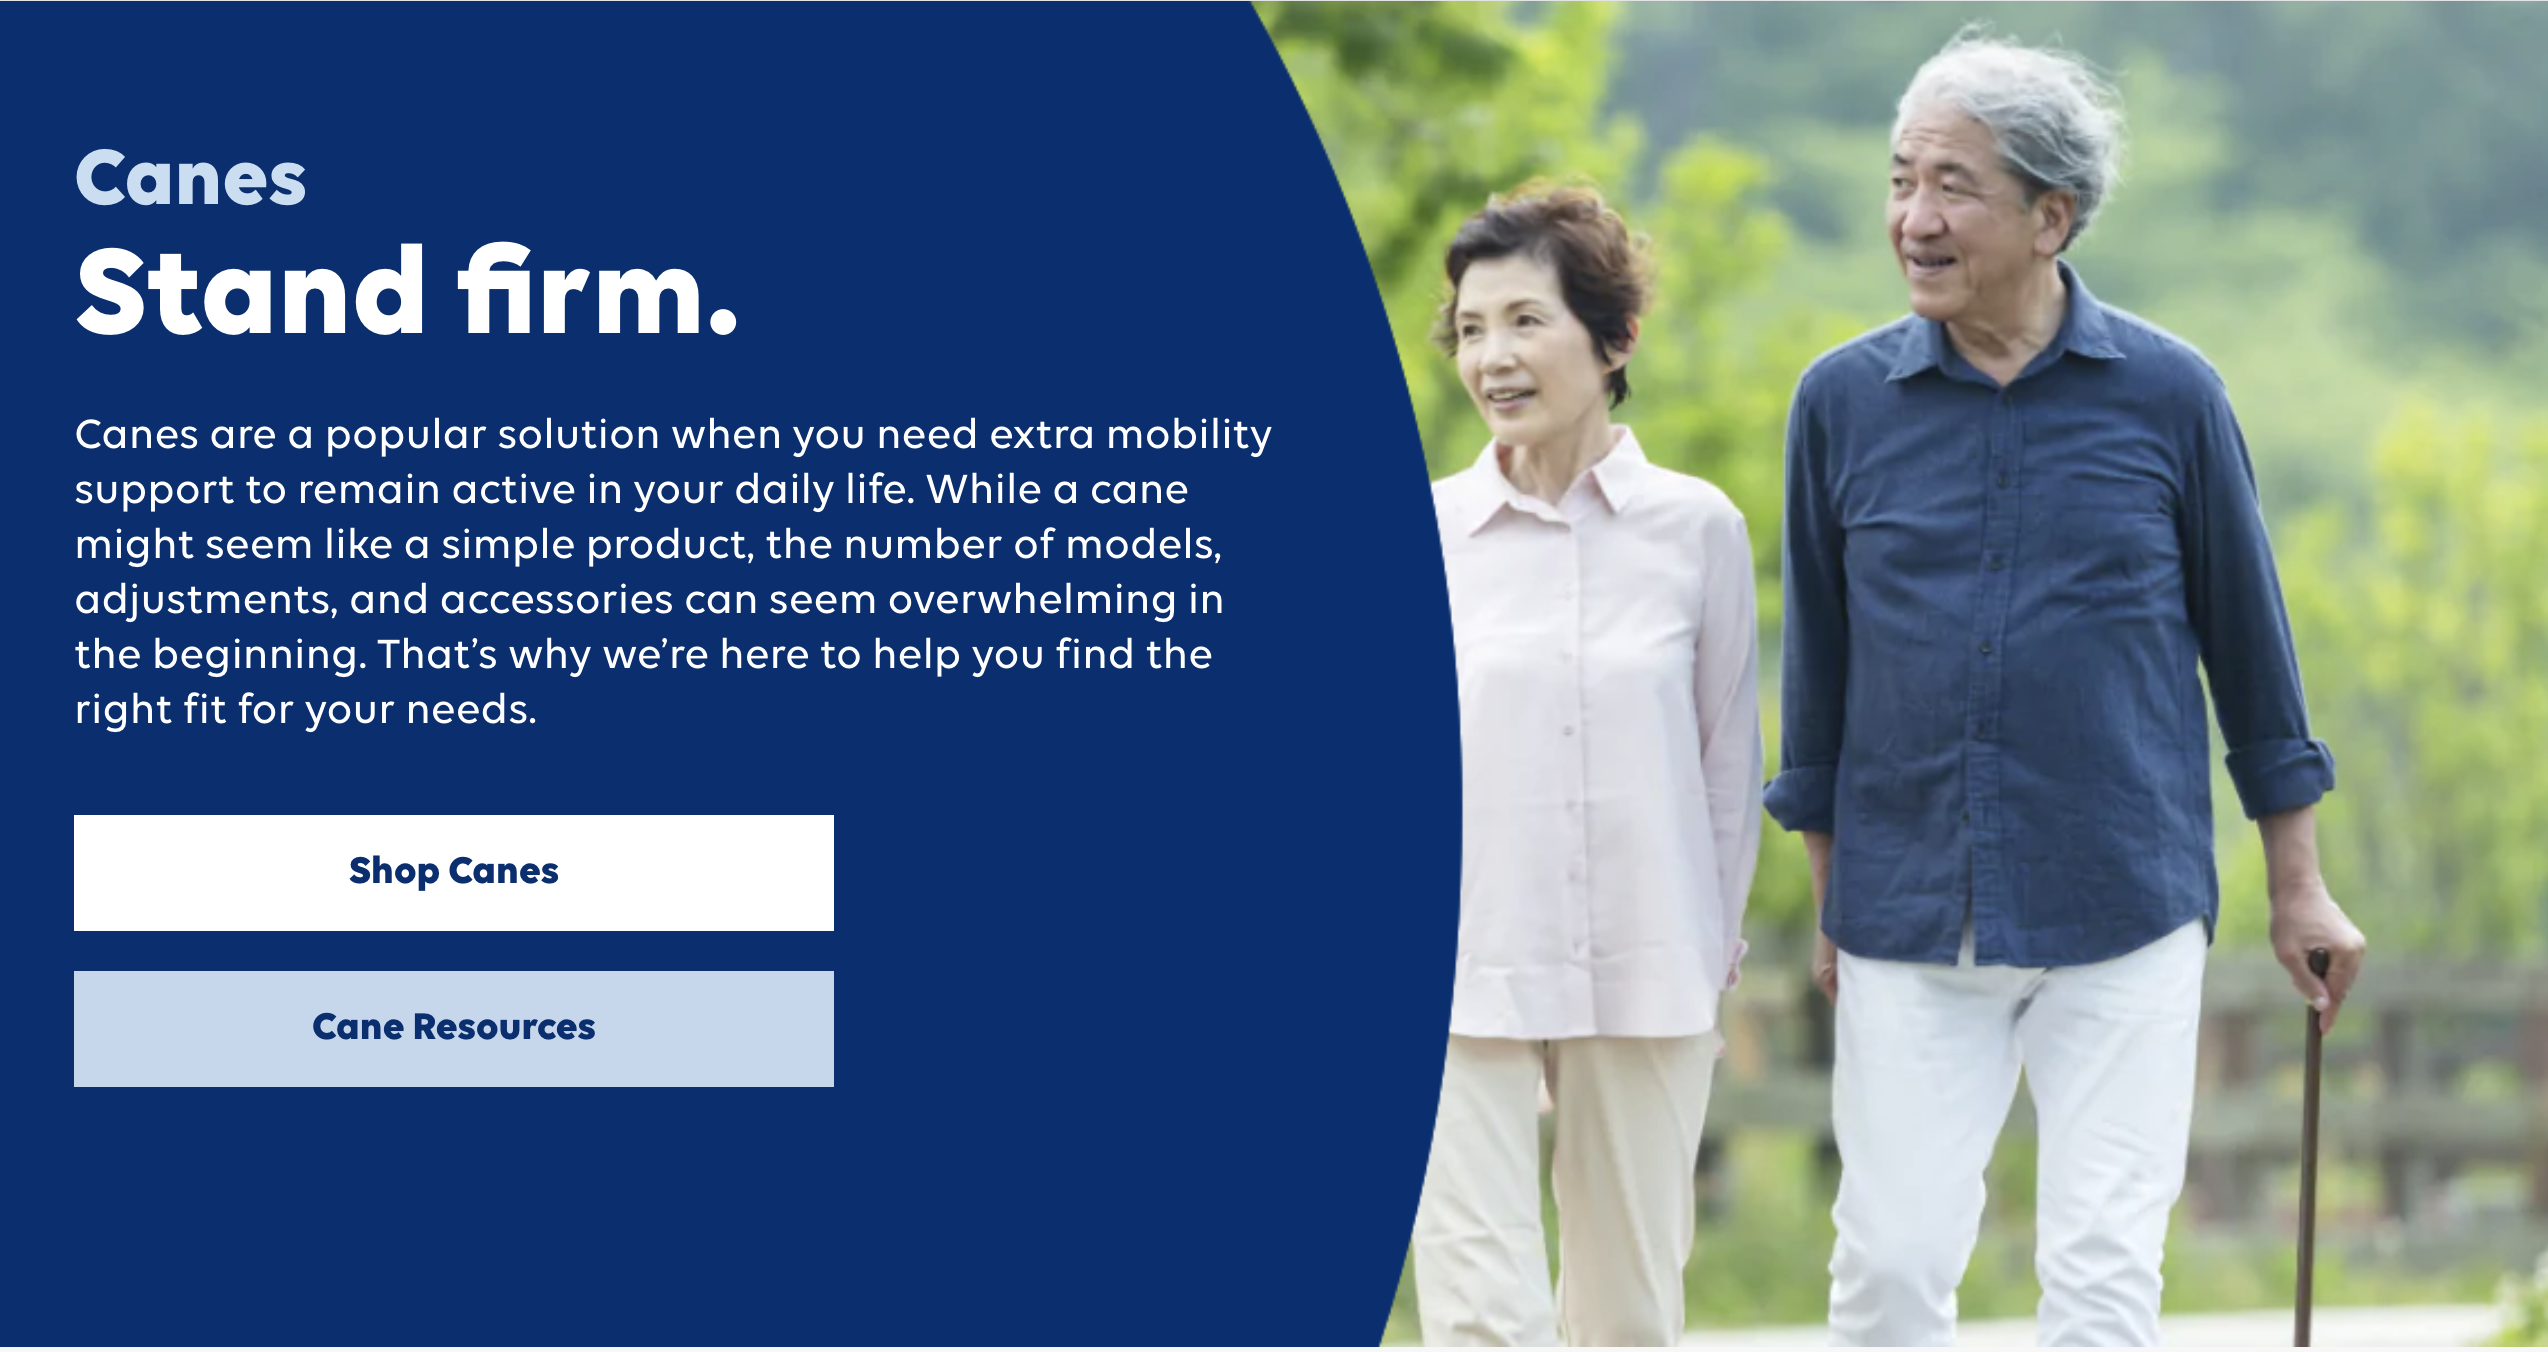 Screenshot of the hero section for Shoppers Drugmart Wellwise landing page for canesimage on right side shows a senior woman and man walking outside on a trail with trees in the background. The man is using a plain brown walking cane. The couple are smiling. They appear Asian. Left side is a medium blue area with white text. The text says: Canes. Stand Firm. Canes are a popular solution when you need extra mobility support to remain active in your daily life. While a cane might seem like a simple product, the number of models, adjustments, and accessories can seem overwhelming in the beginning. That’s why we’re here to help you find the right fit for your needs. There is a button to shop canes and one labeled cane resources